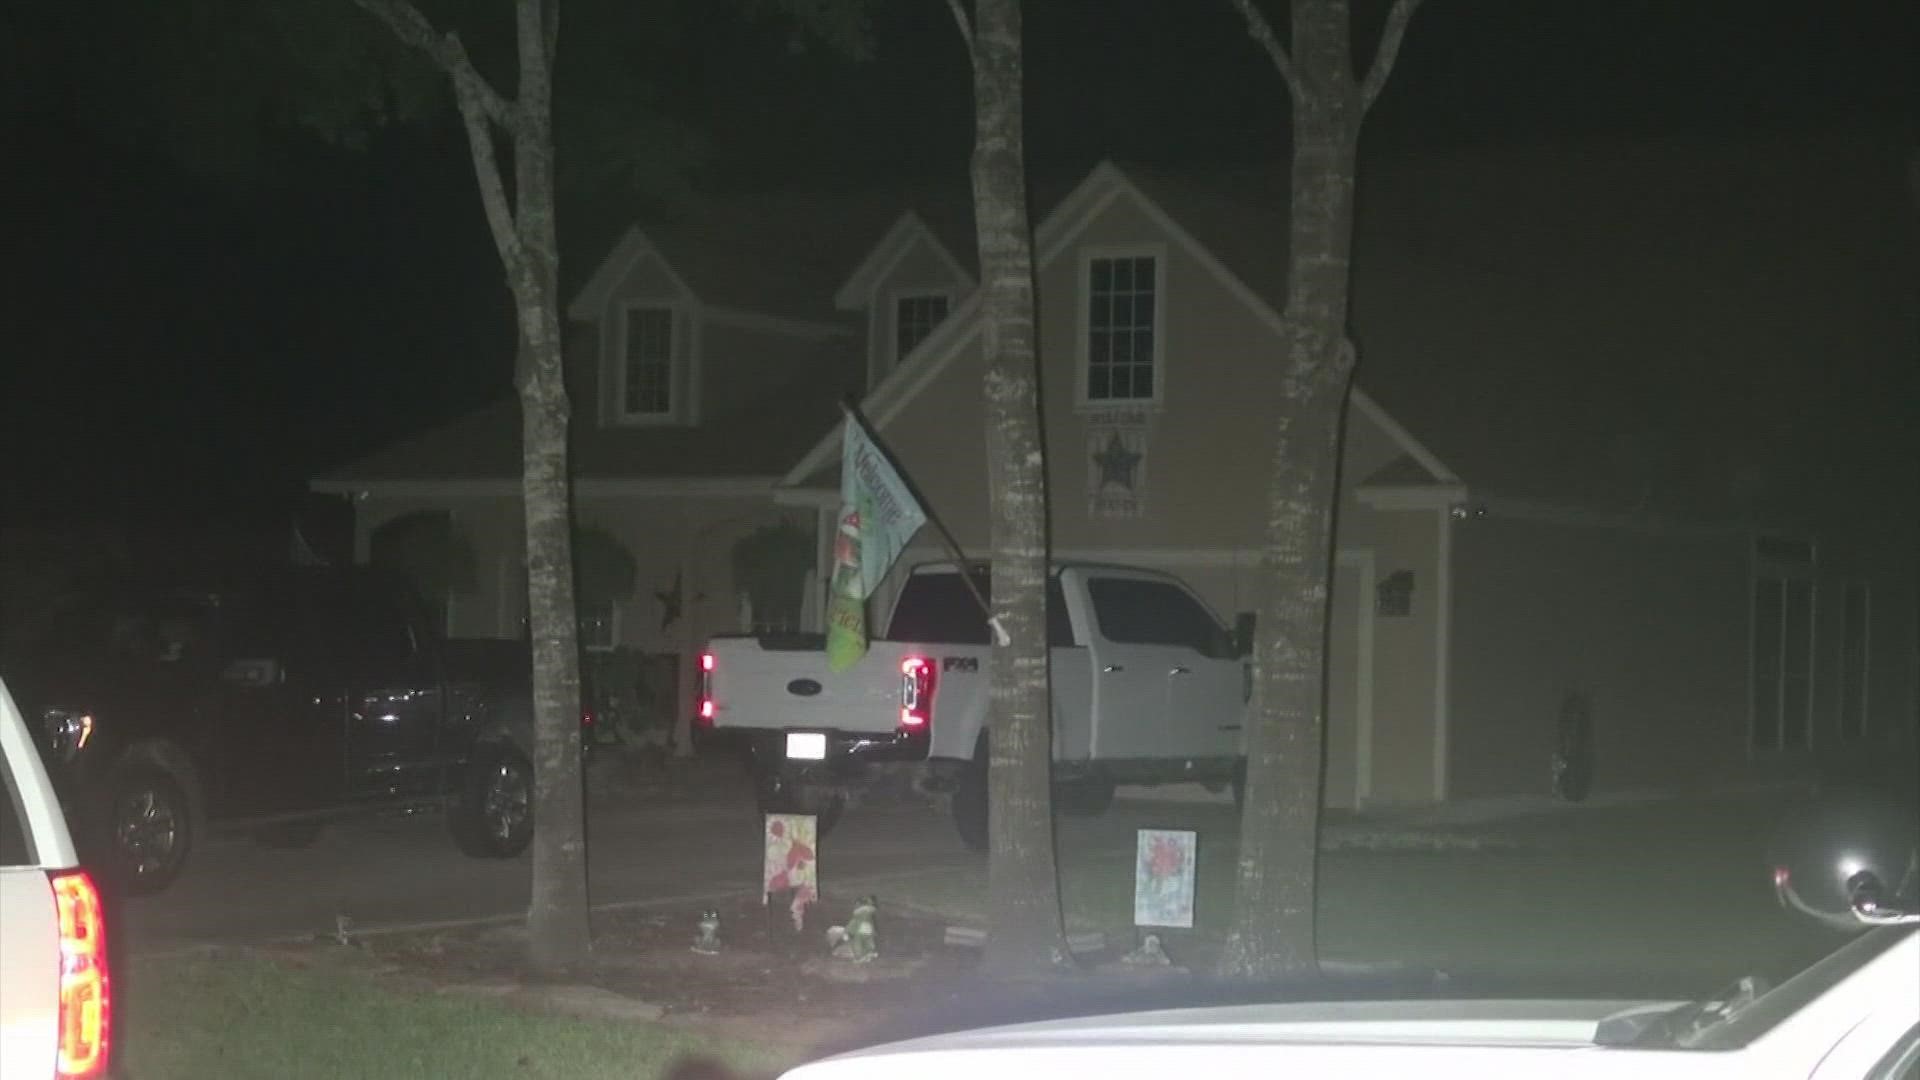 Montgomery County authorities said the off-duty Harris County Sheriff's Office deputy accidentally shot himself in the chest on Thursday night.